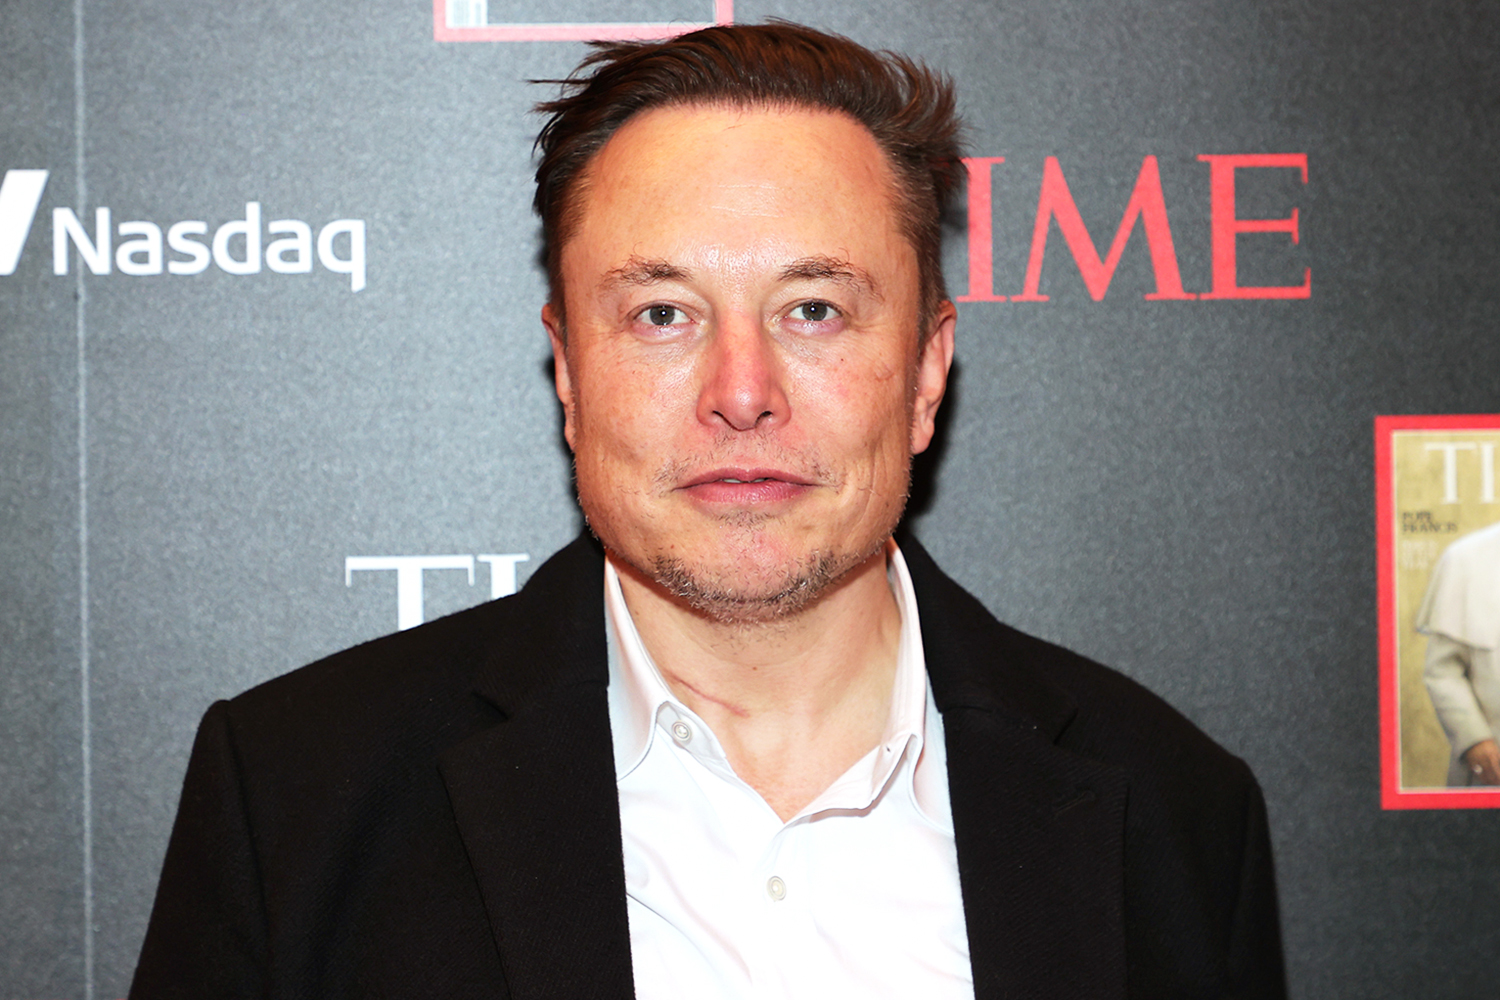 bizarre elon musk facts - Elon Musk works between 80 and 90 hours a week. -deleted user